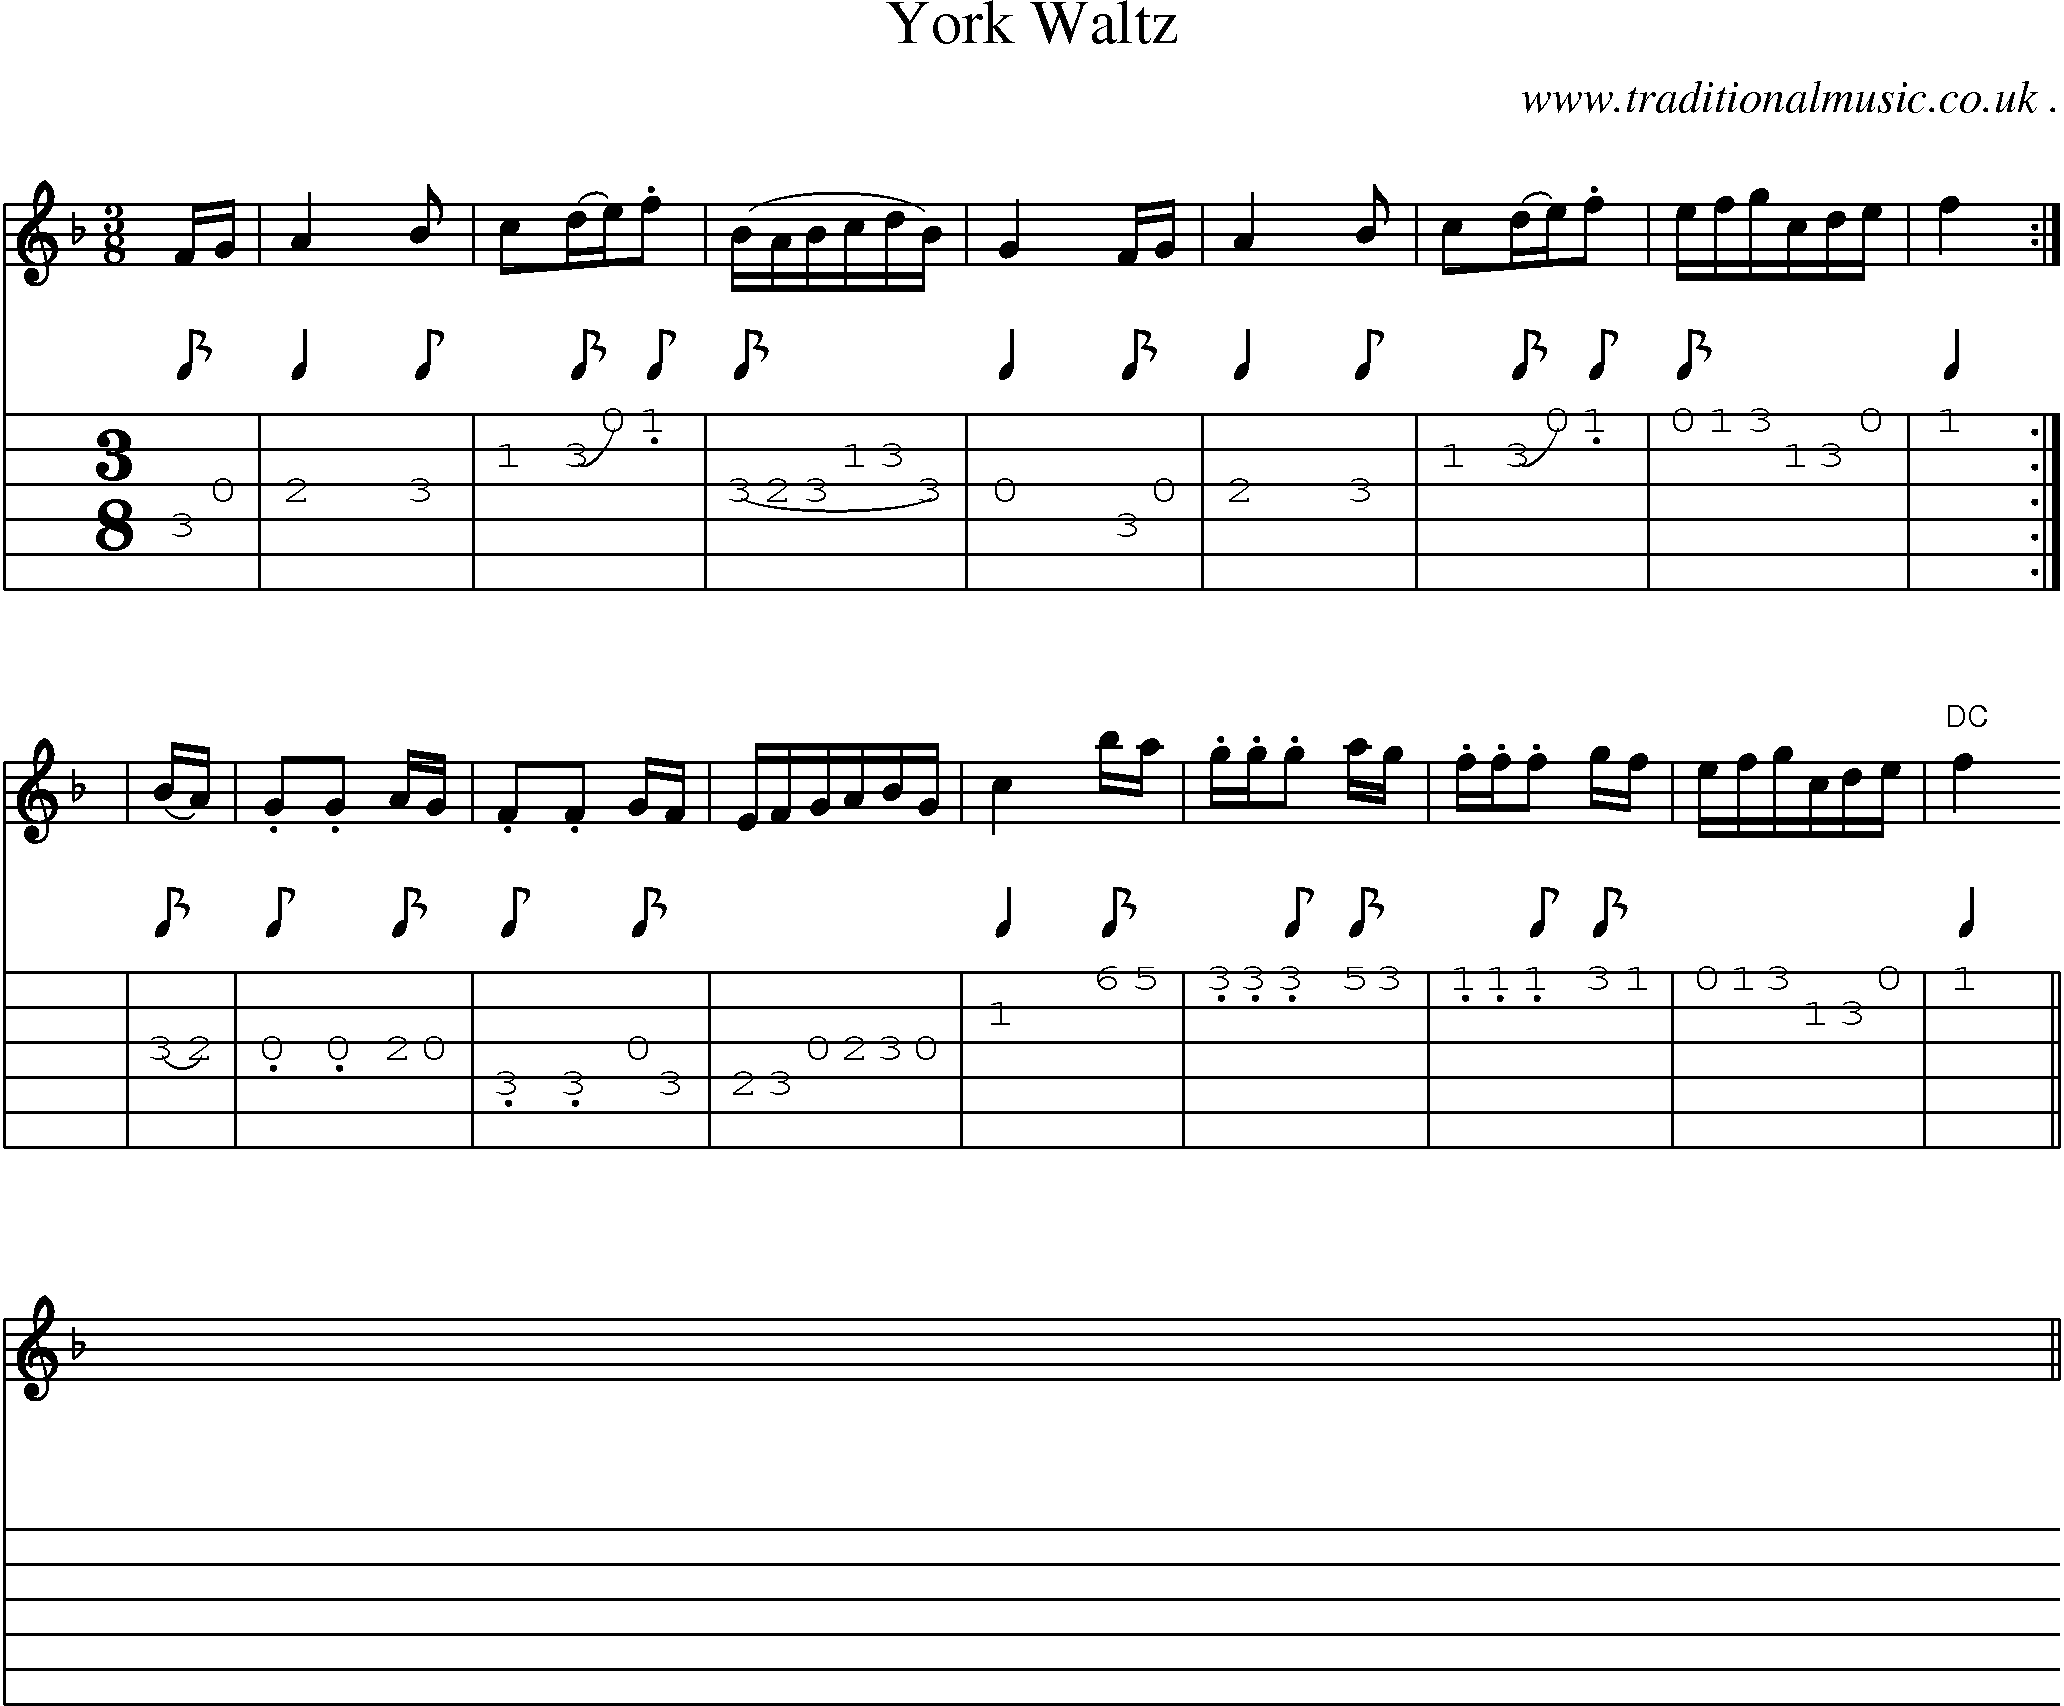 Sheet-Music and Guitar Tabs for York Waltz